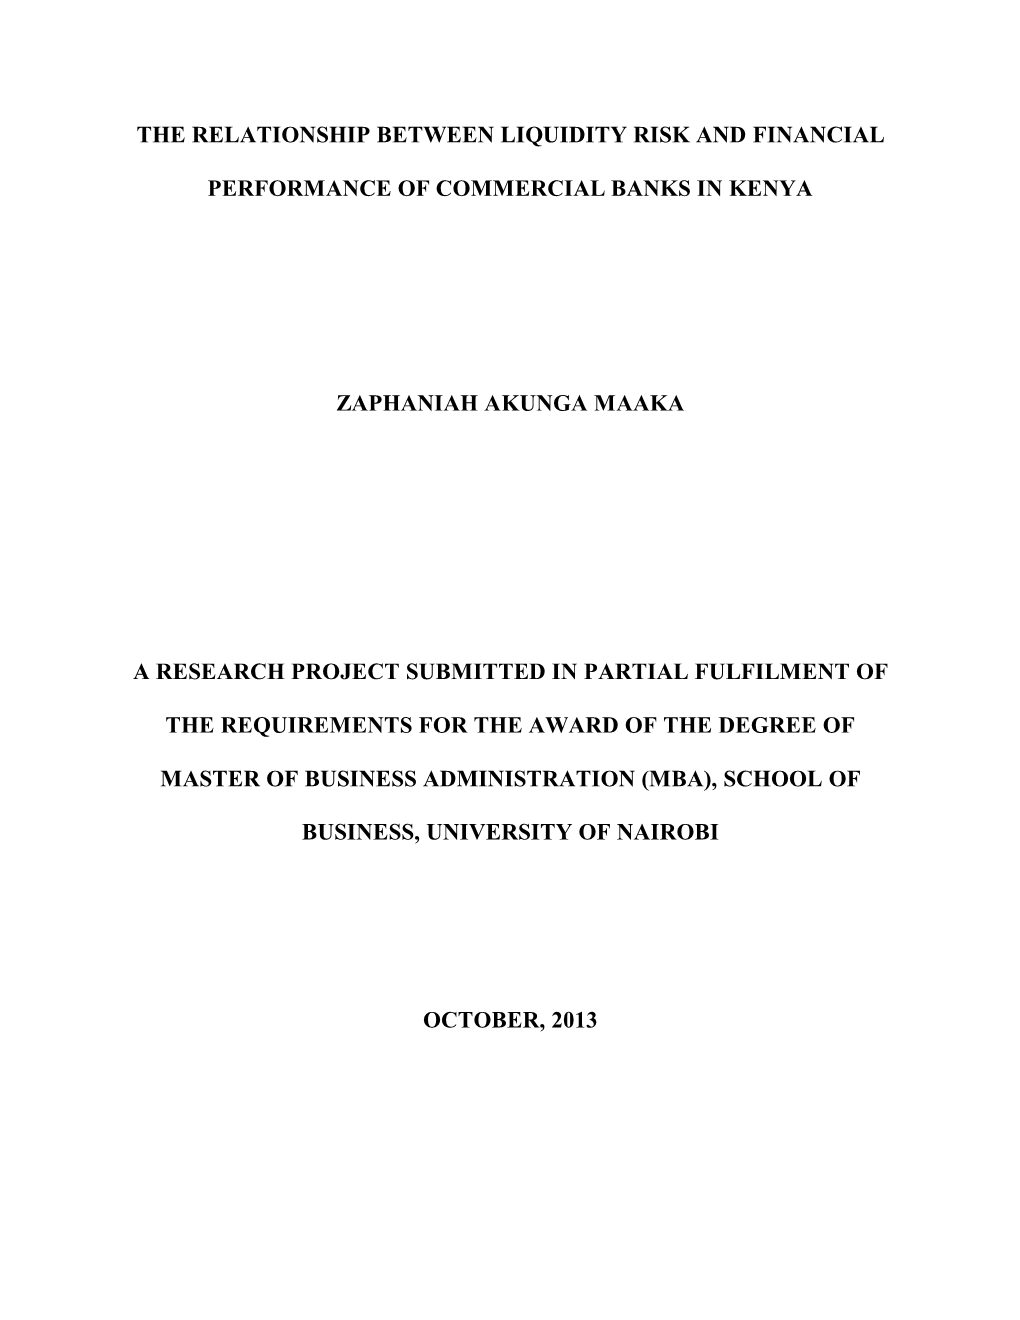 Relationship Between Liquidity Risk and Financial Performance of Commercial Banks in Kenya